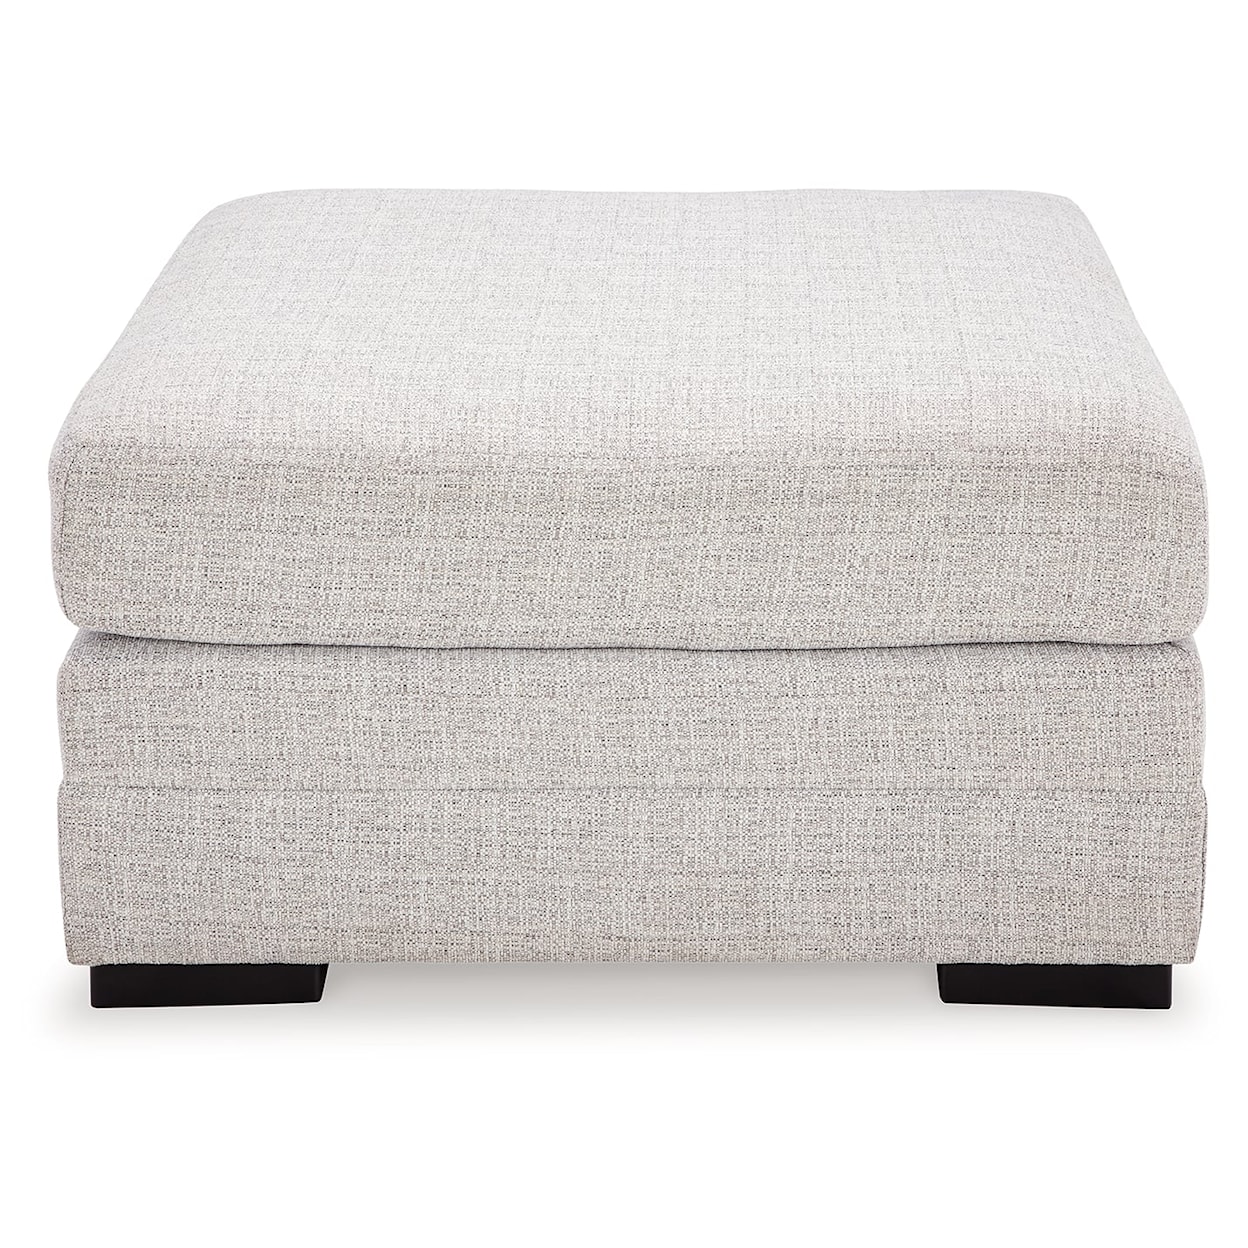 Benchcraft Kennedy Oversized Accent Ottoman